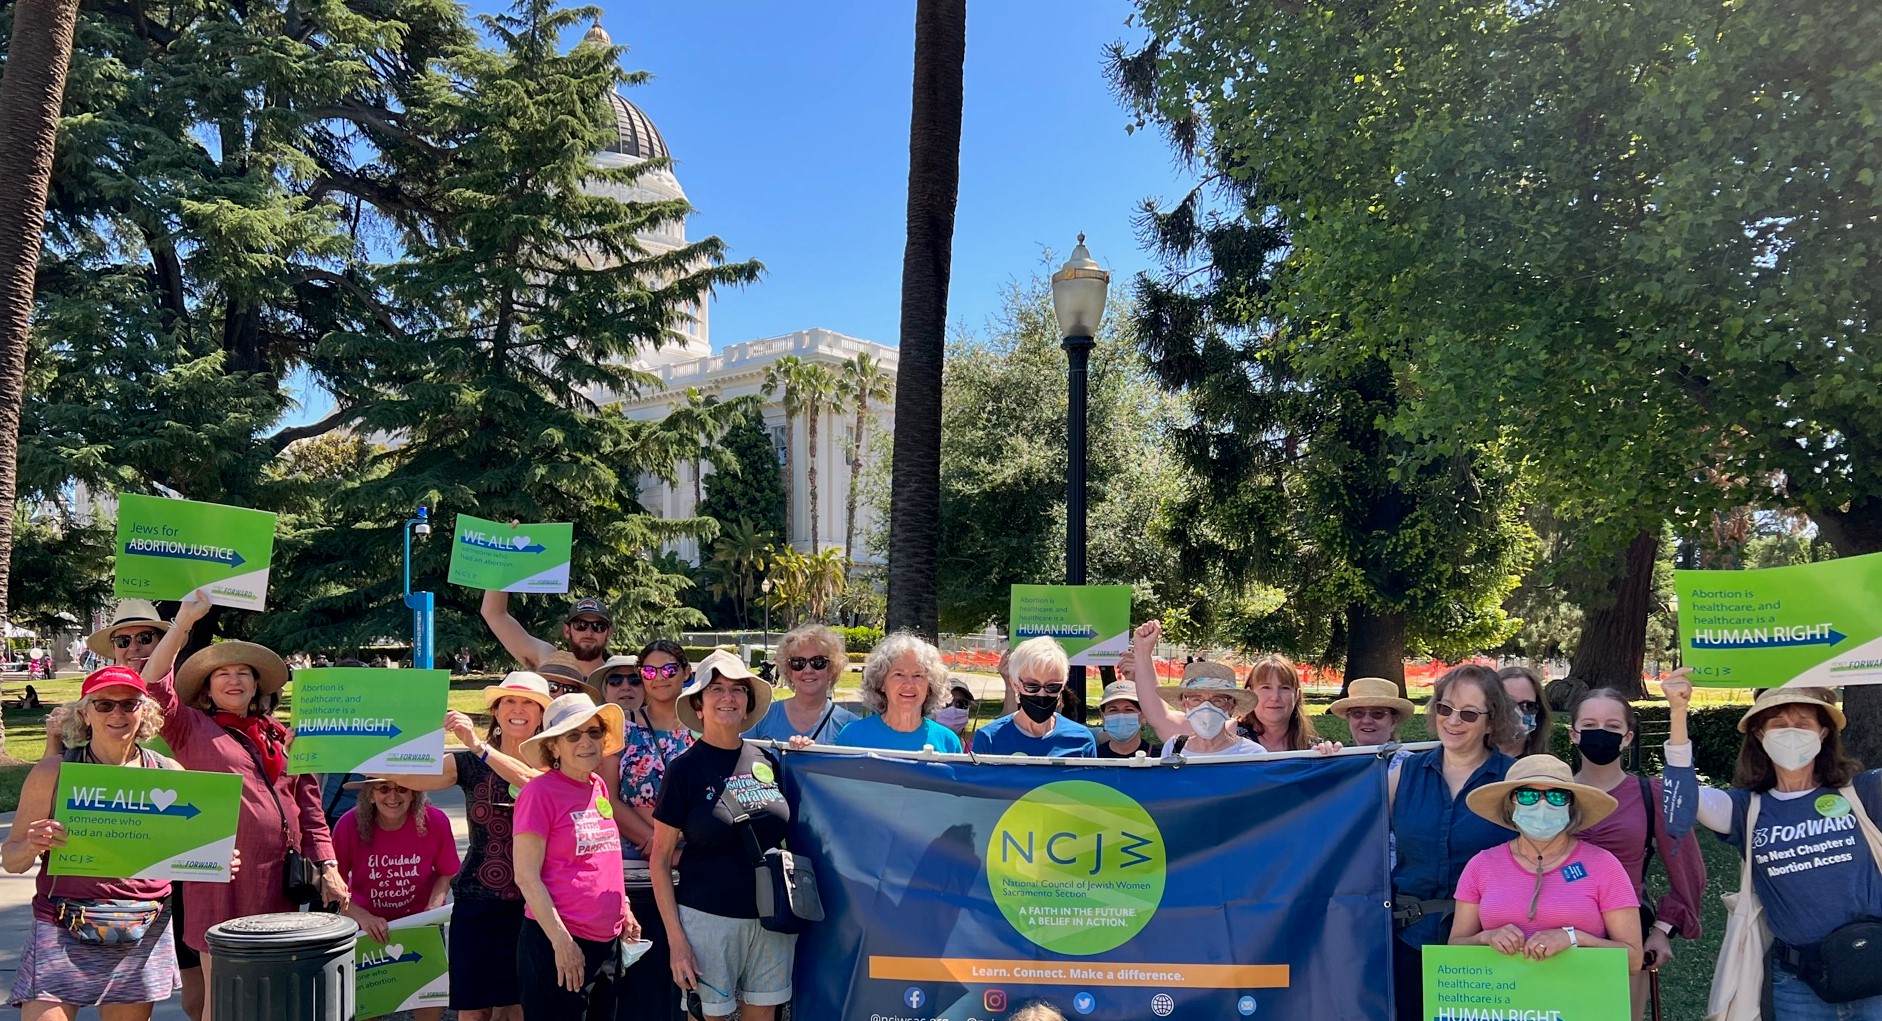 ncjw sacramento members pose with banners in front of the California state capitol